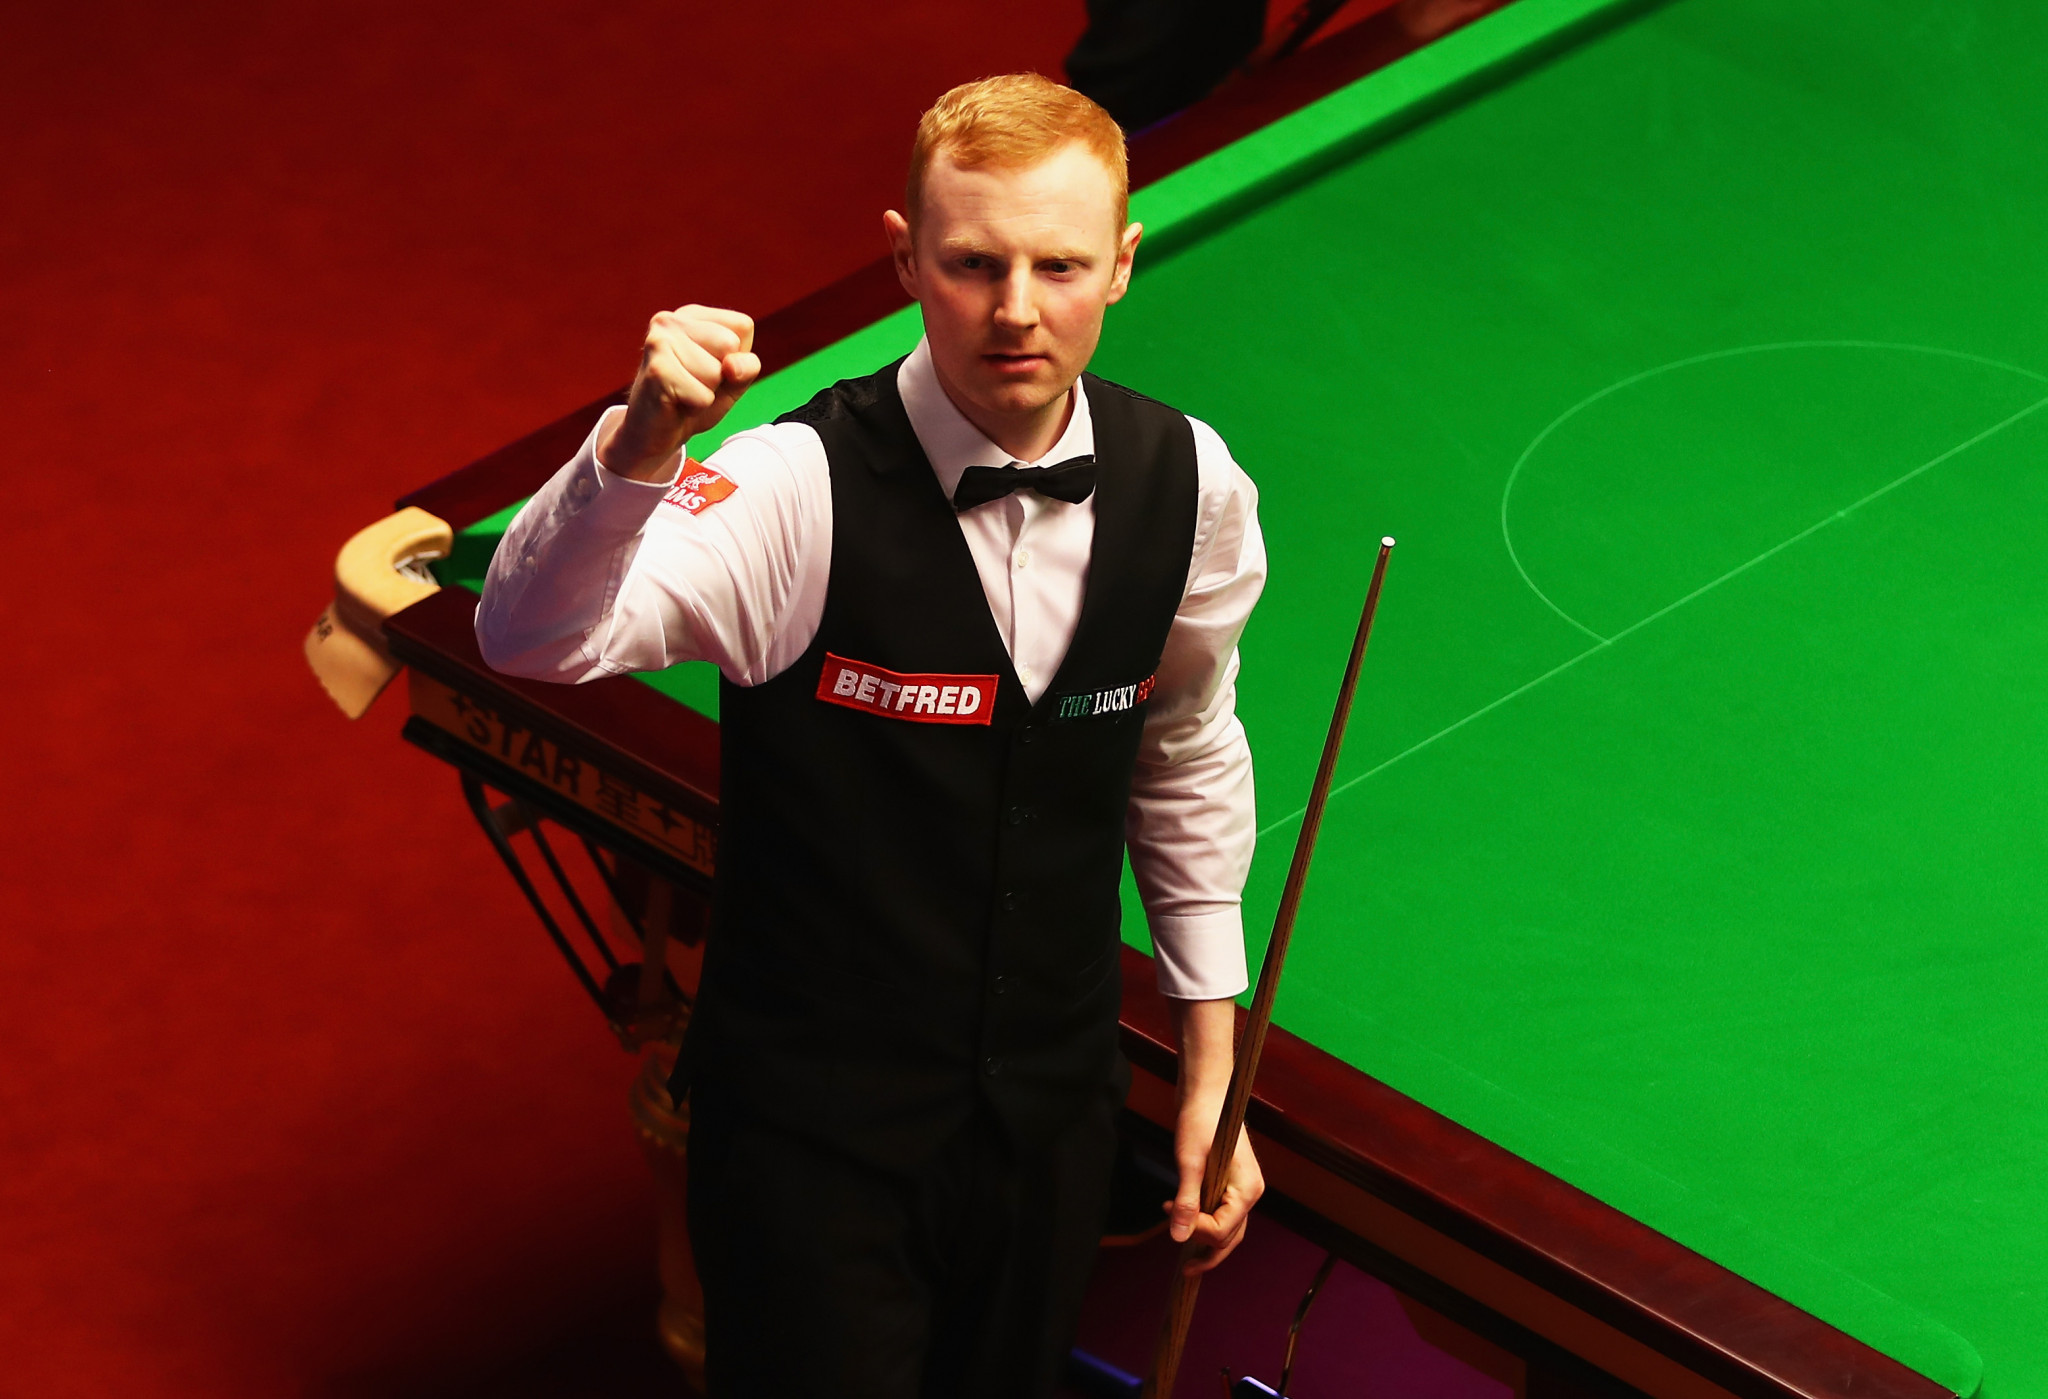 Scotland’s Anthony McGill has booked his place in the second round of the World Snooker Championships ©Getty Images